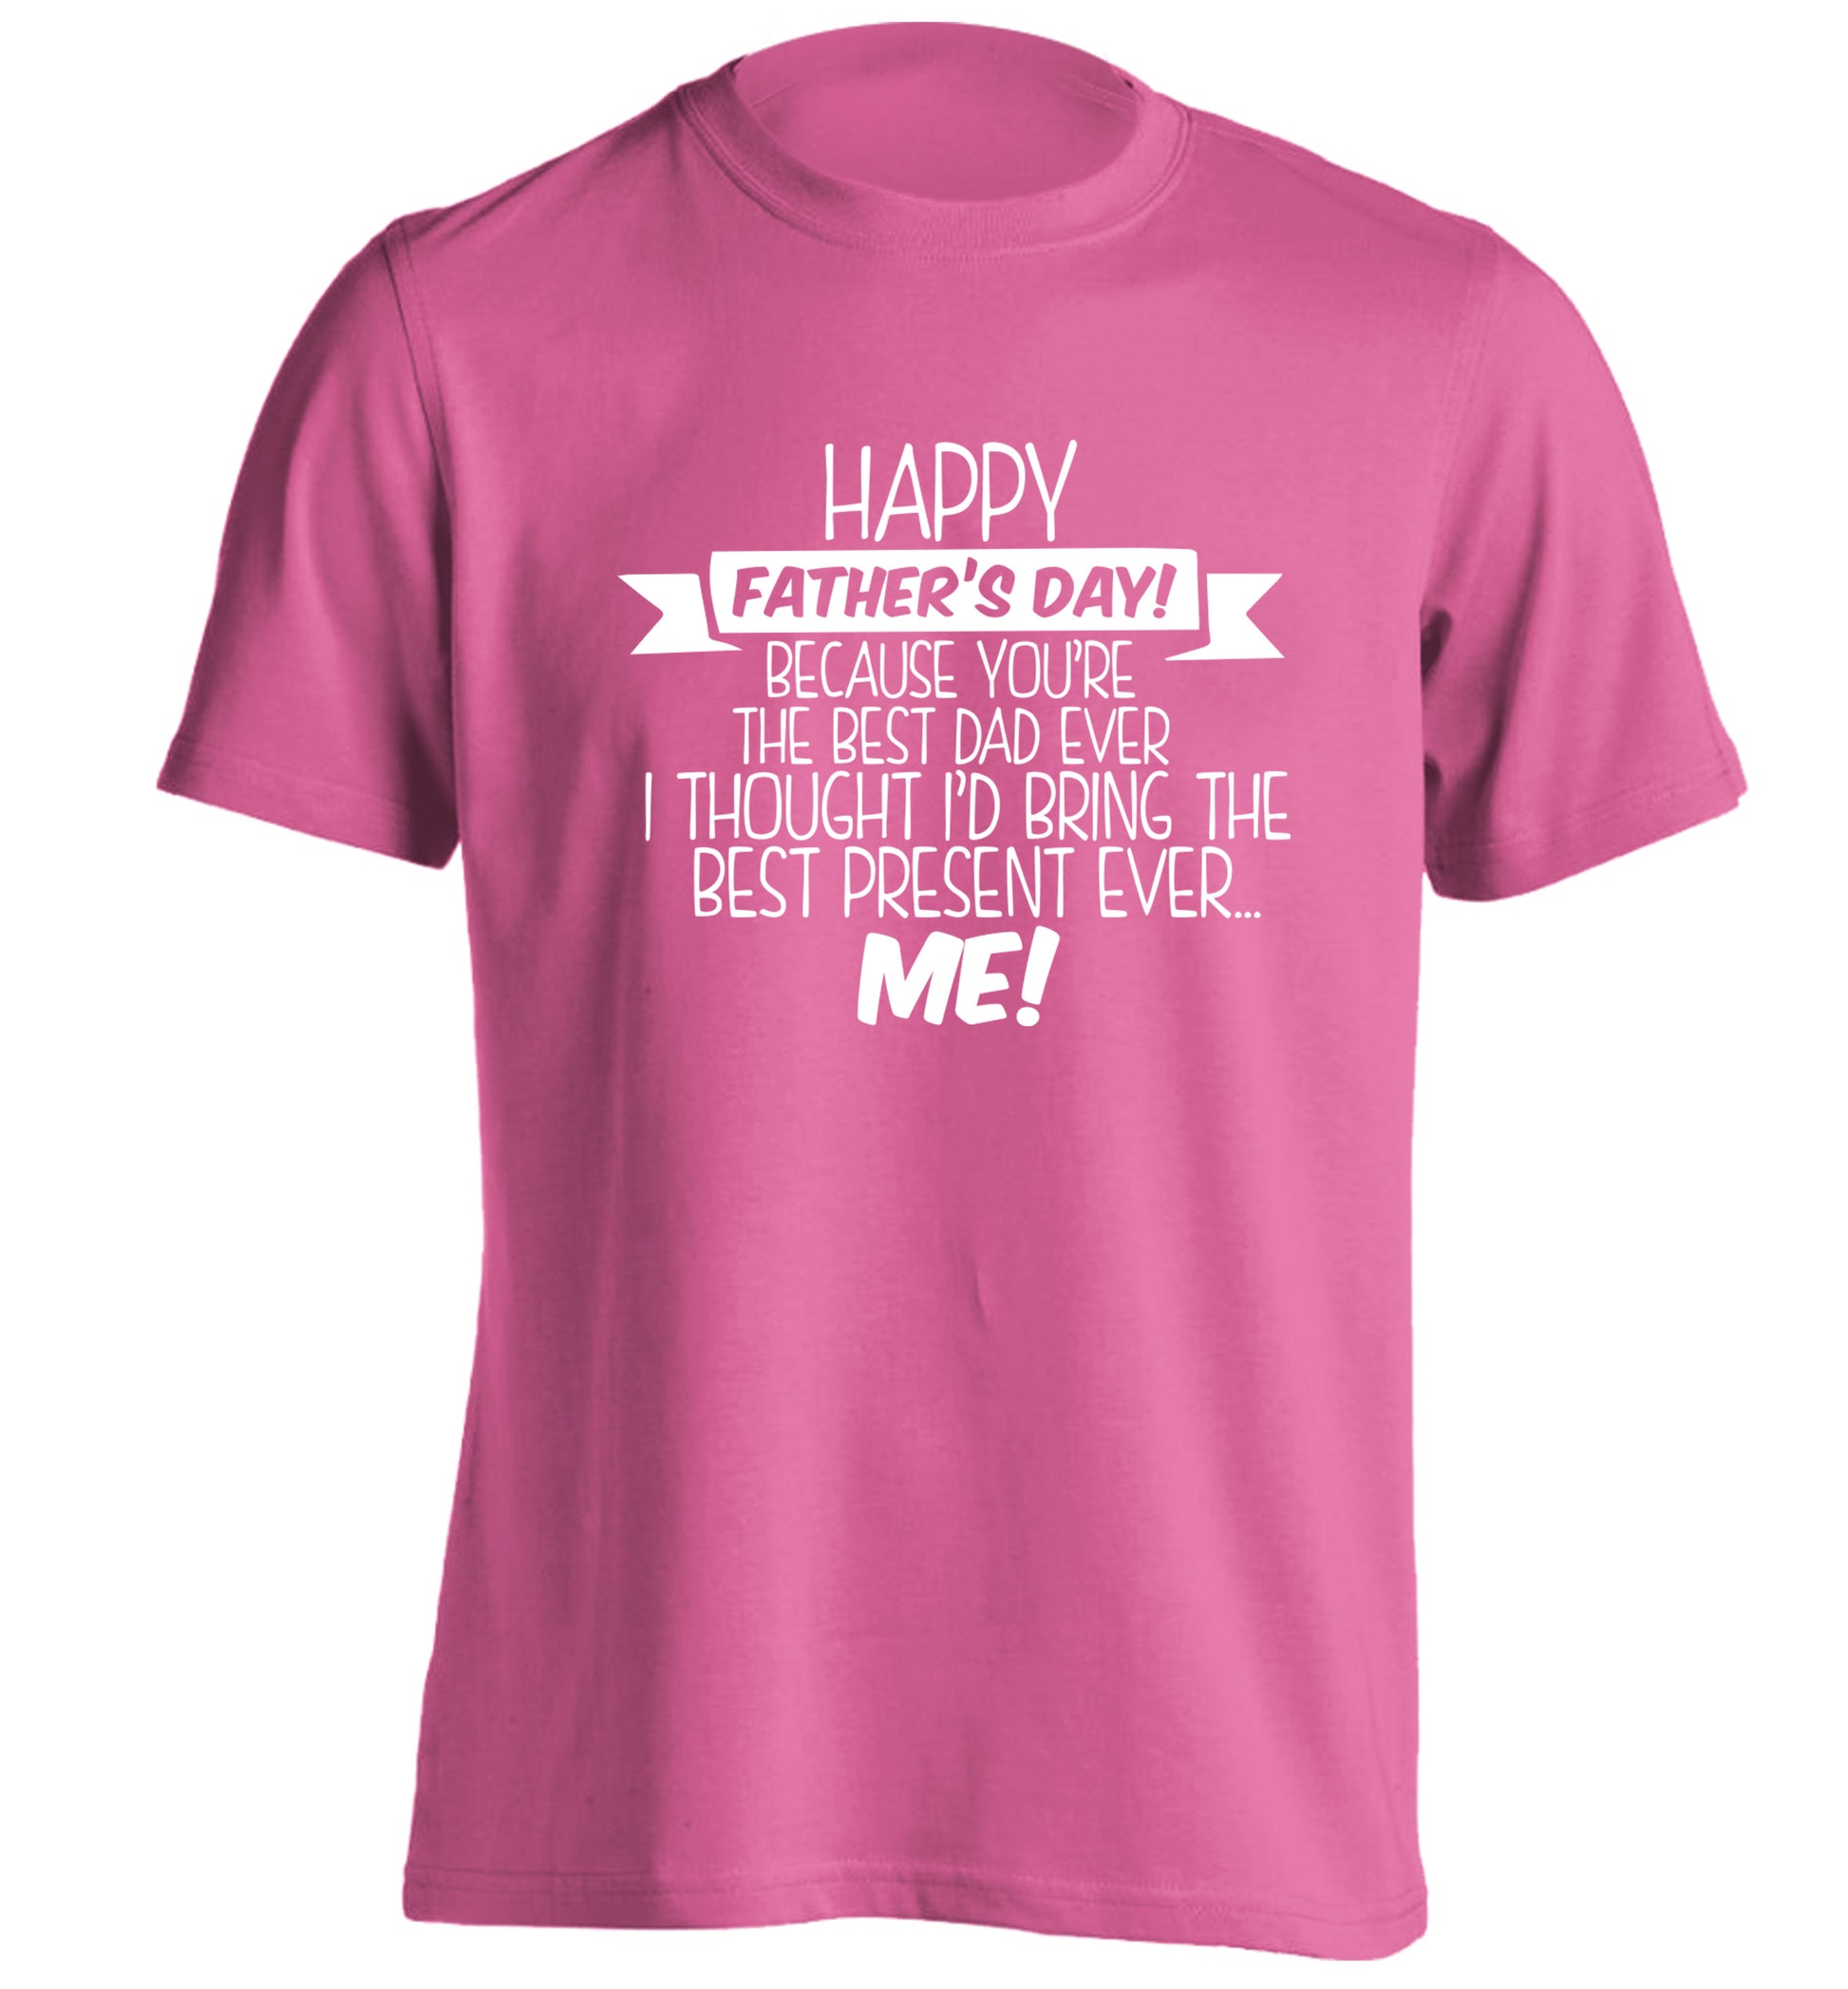 Happy Father's day, because you're the best dad ever I thought I'd bring the best present ever...me! adults unisex pink Tshirt 2XL